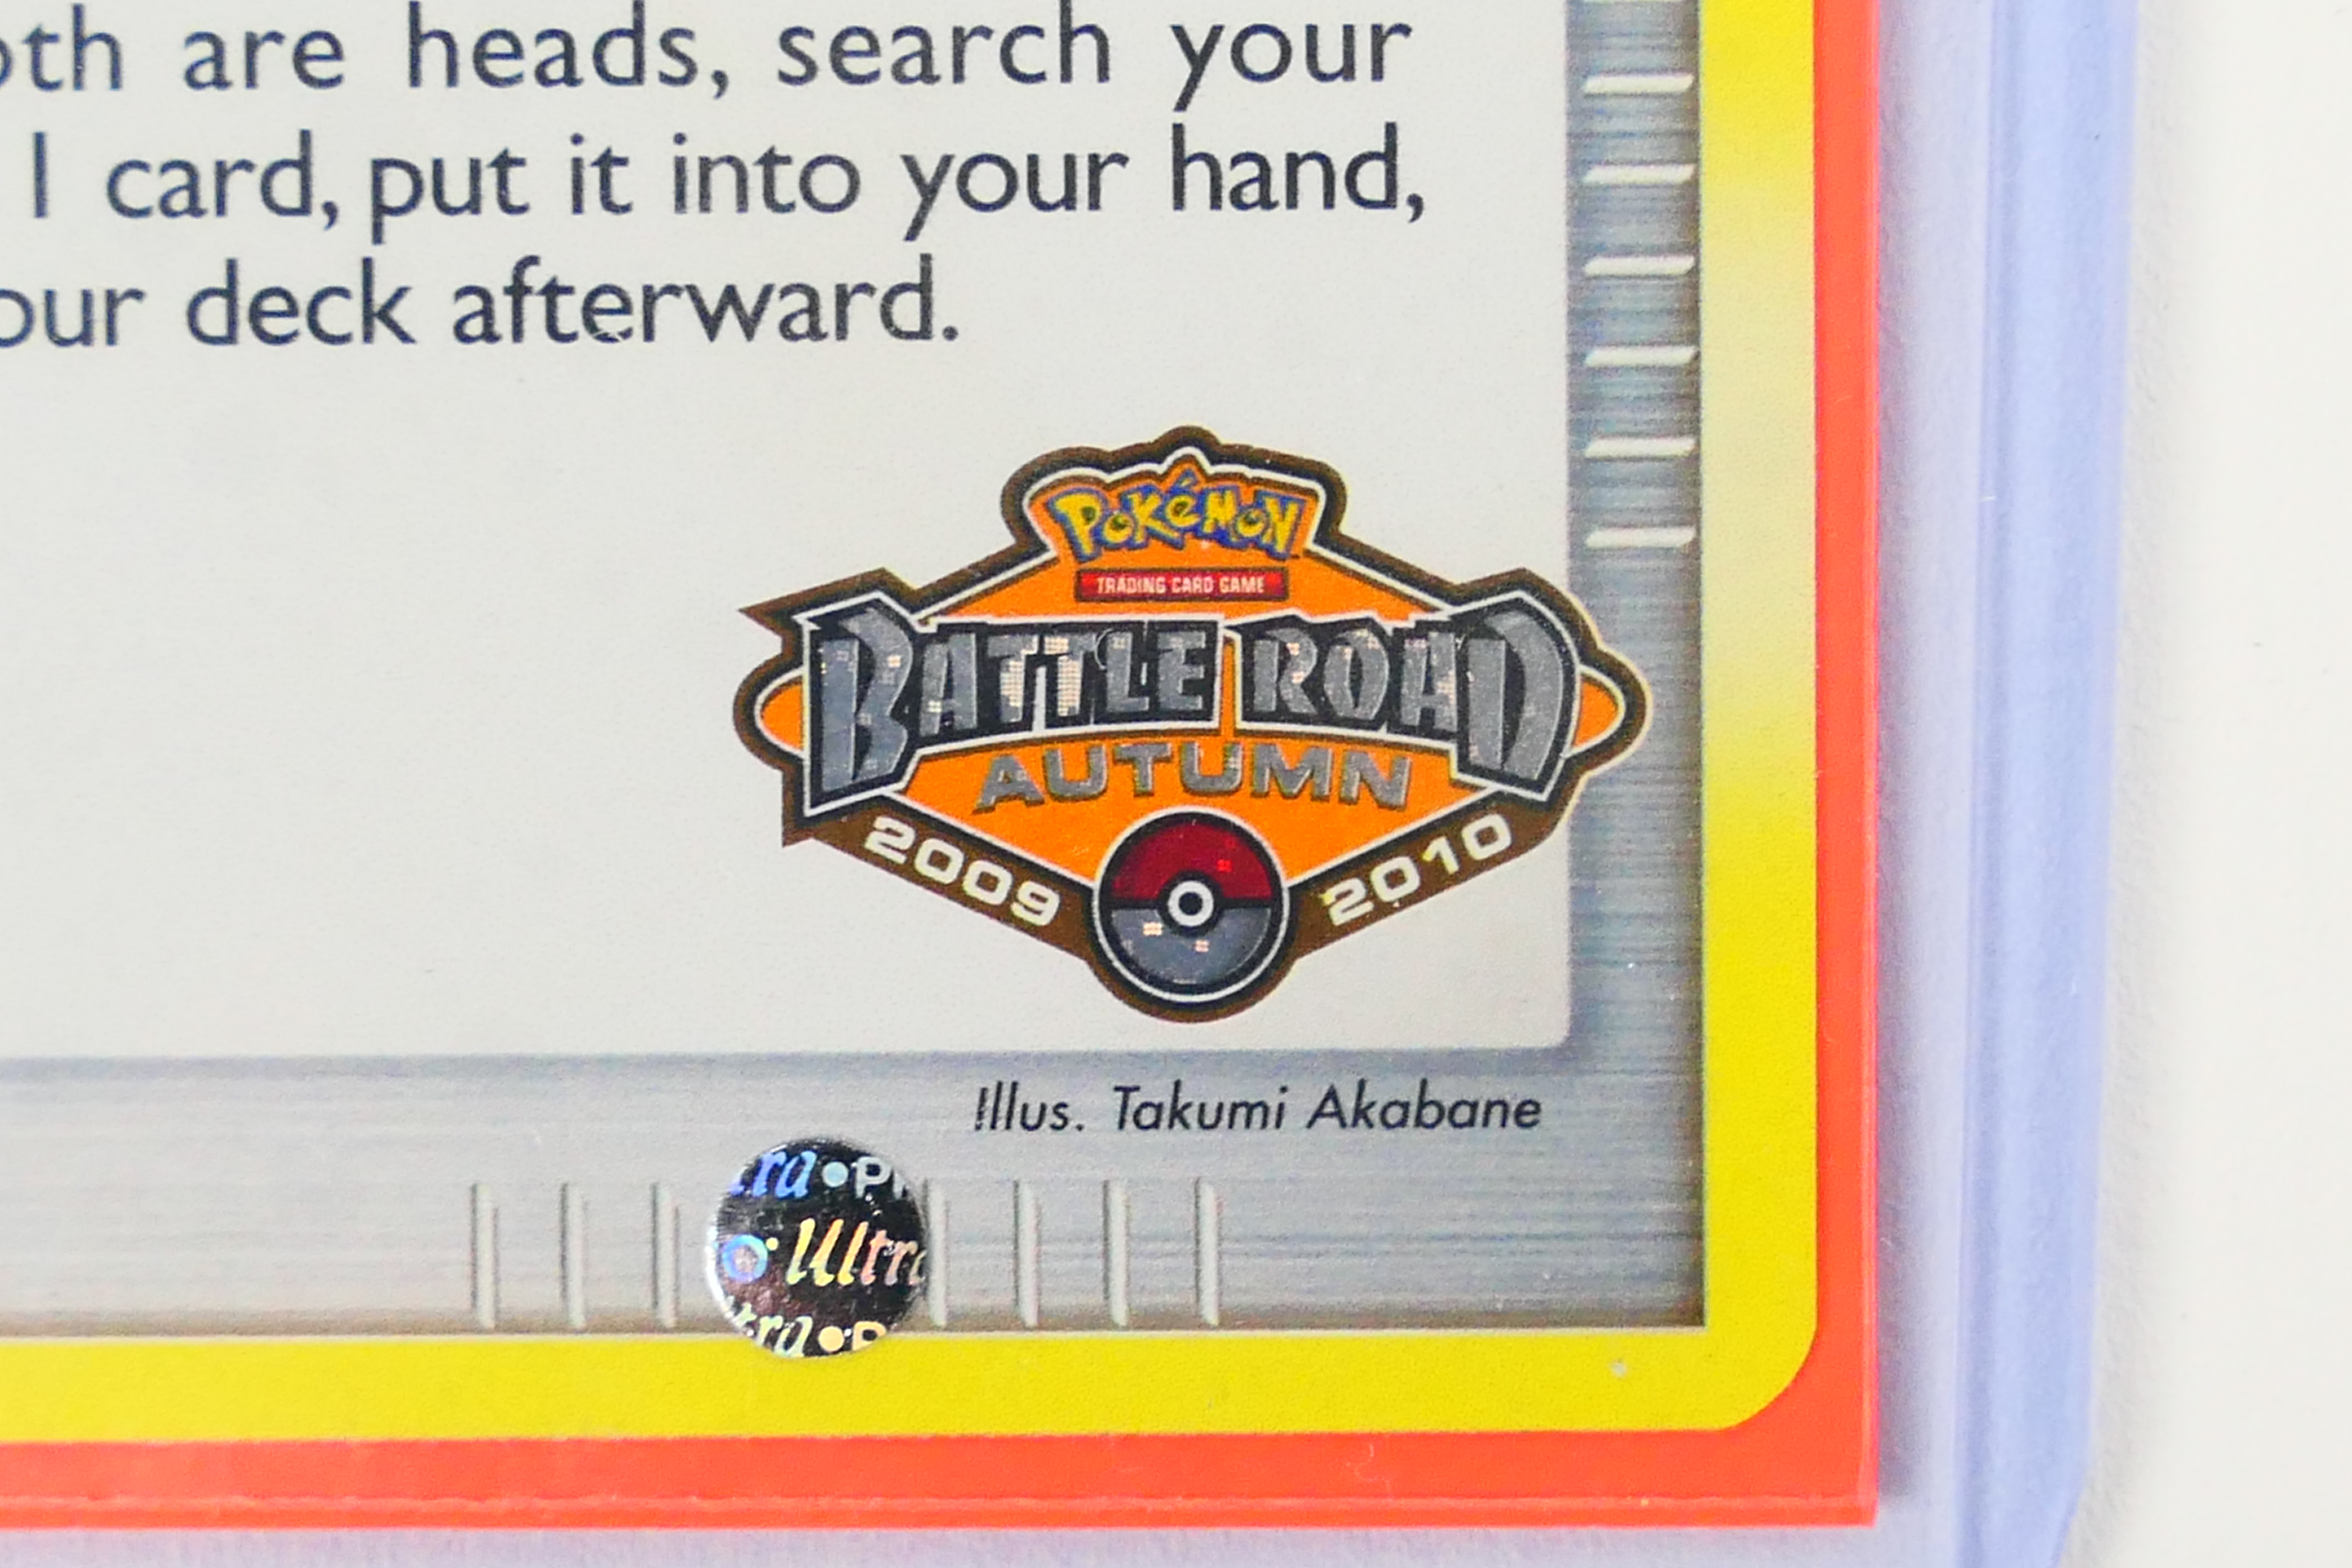 Pokemon - A Pokemon Battle Road Victory Medal Trainer Card for Autumn 2009 / 2010, - Image 2 of 5